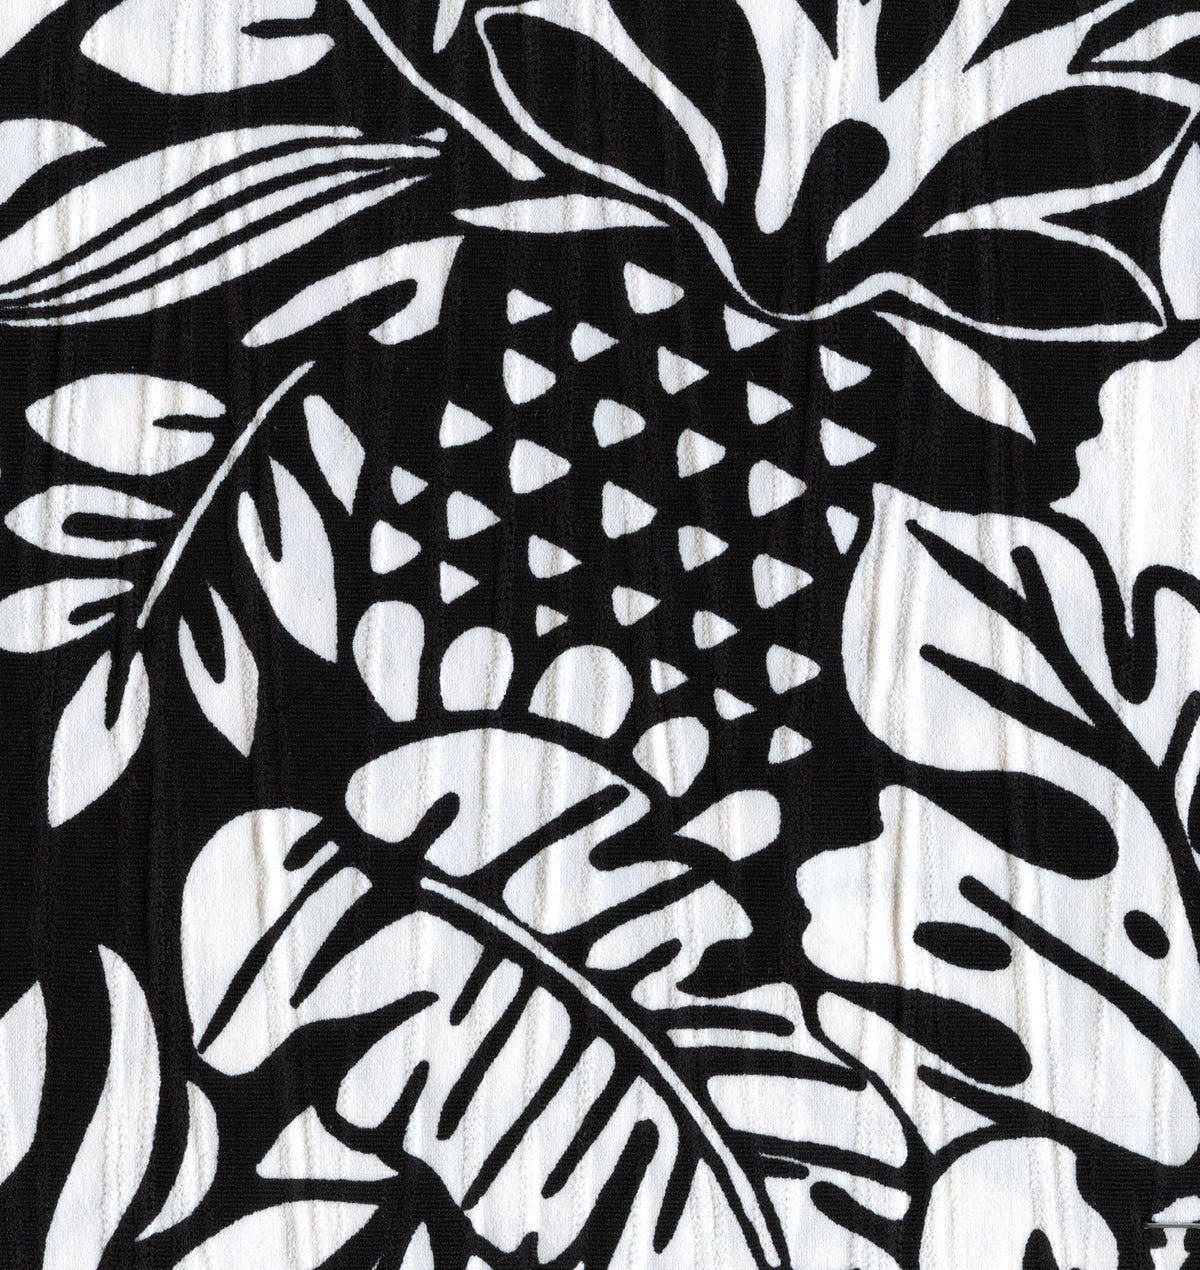 Sunsets Caribbean Seagrass Texture black-and-white tropical print featuring hibiscus and pineaples on a textured fabric